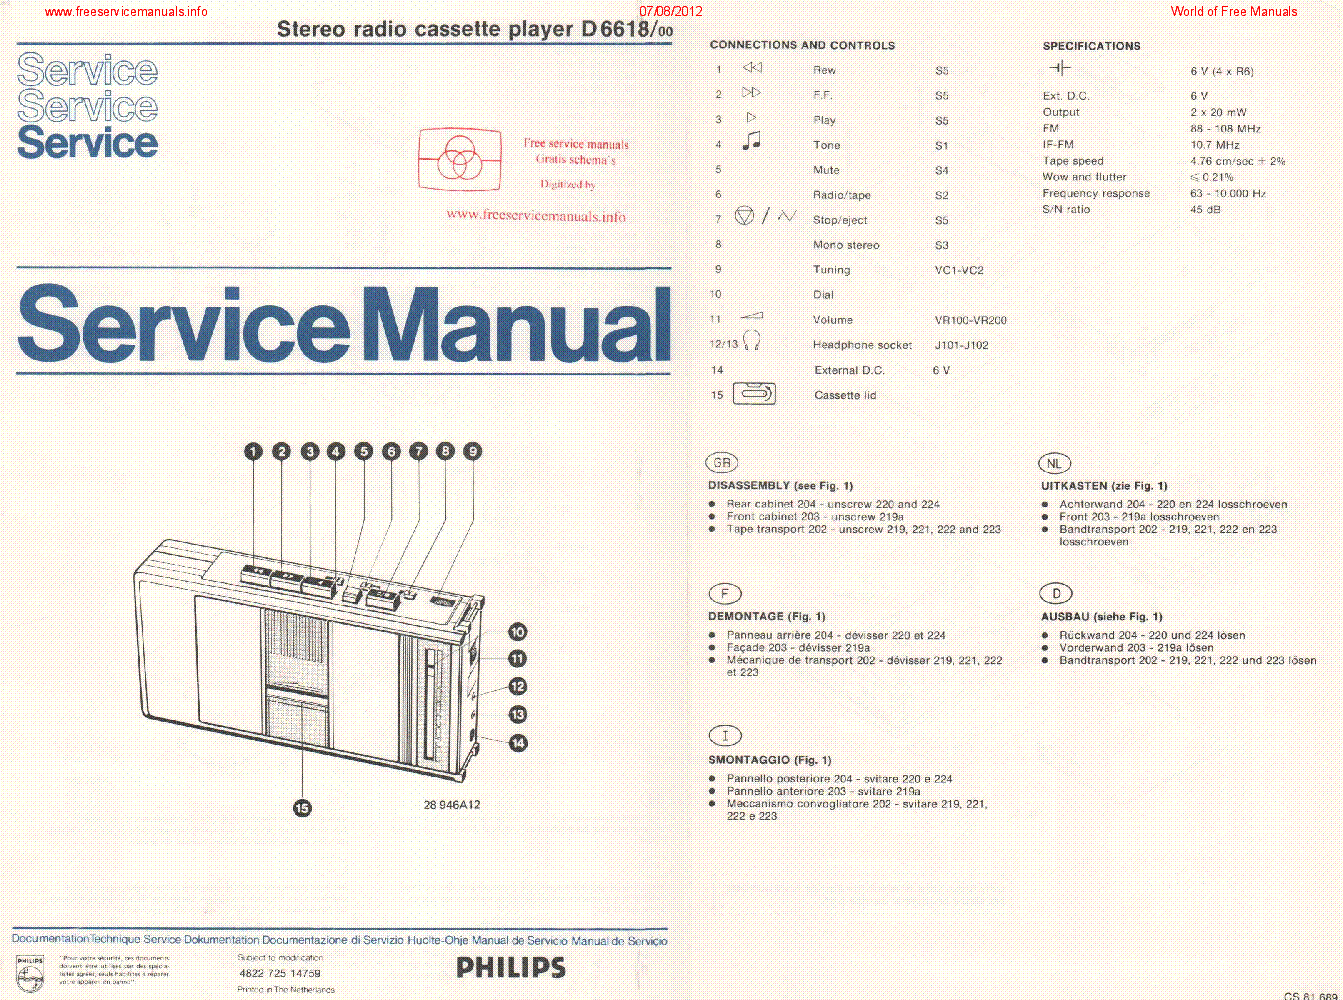 PHILIPS D 6618 service manual (1st page)